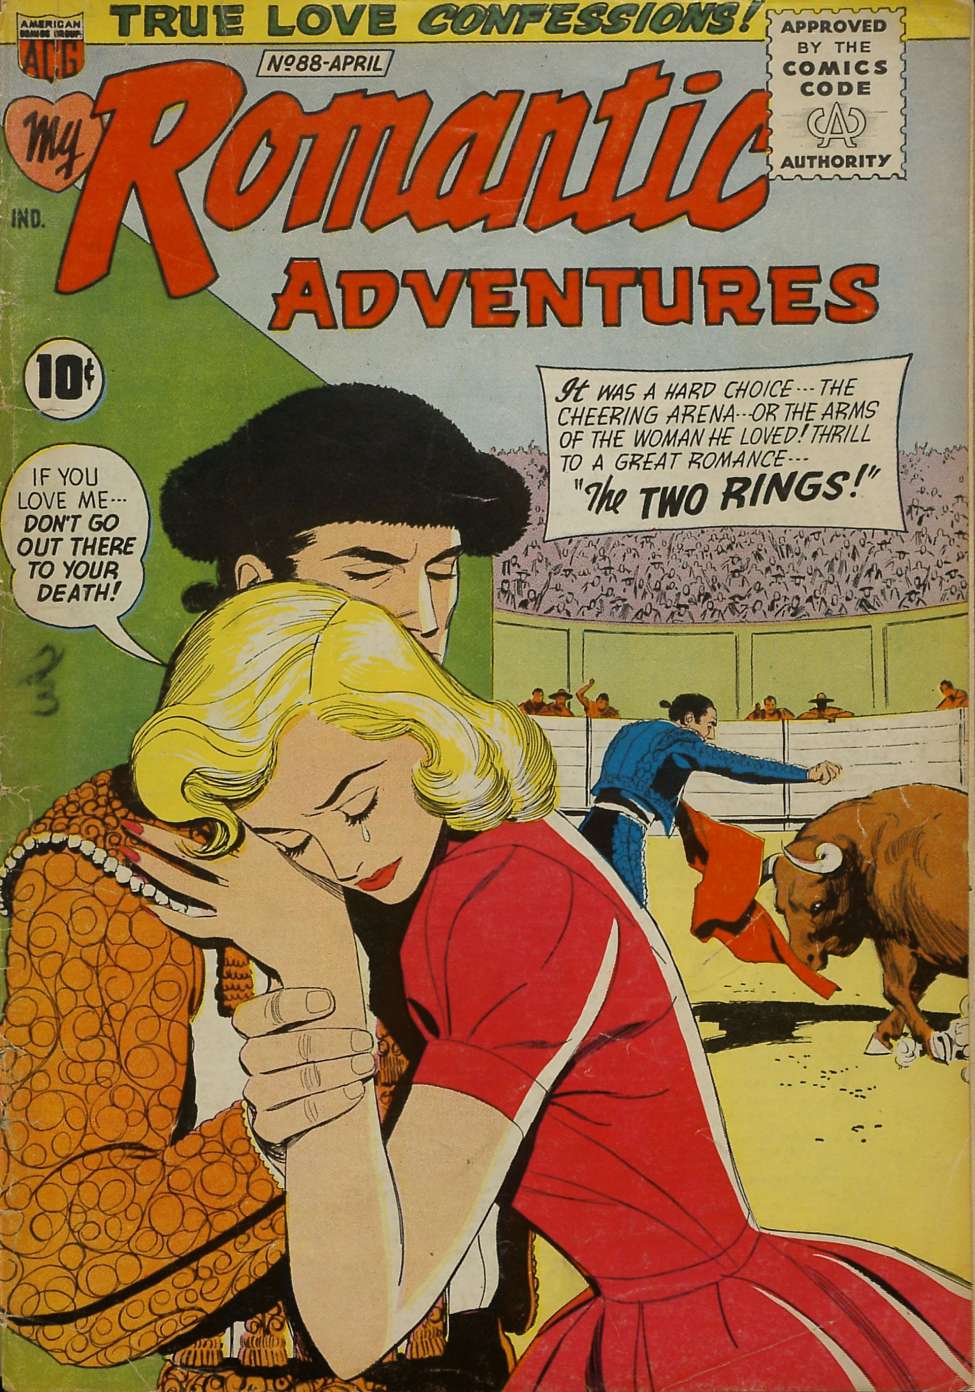 Book Cover For My Romantic Adventures 88